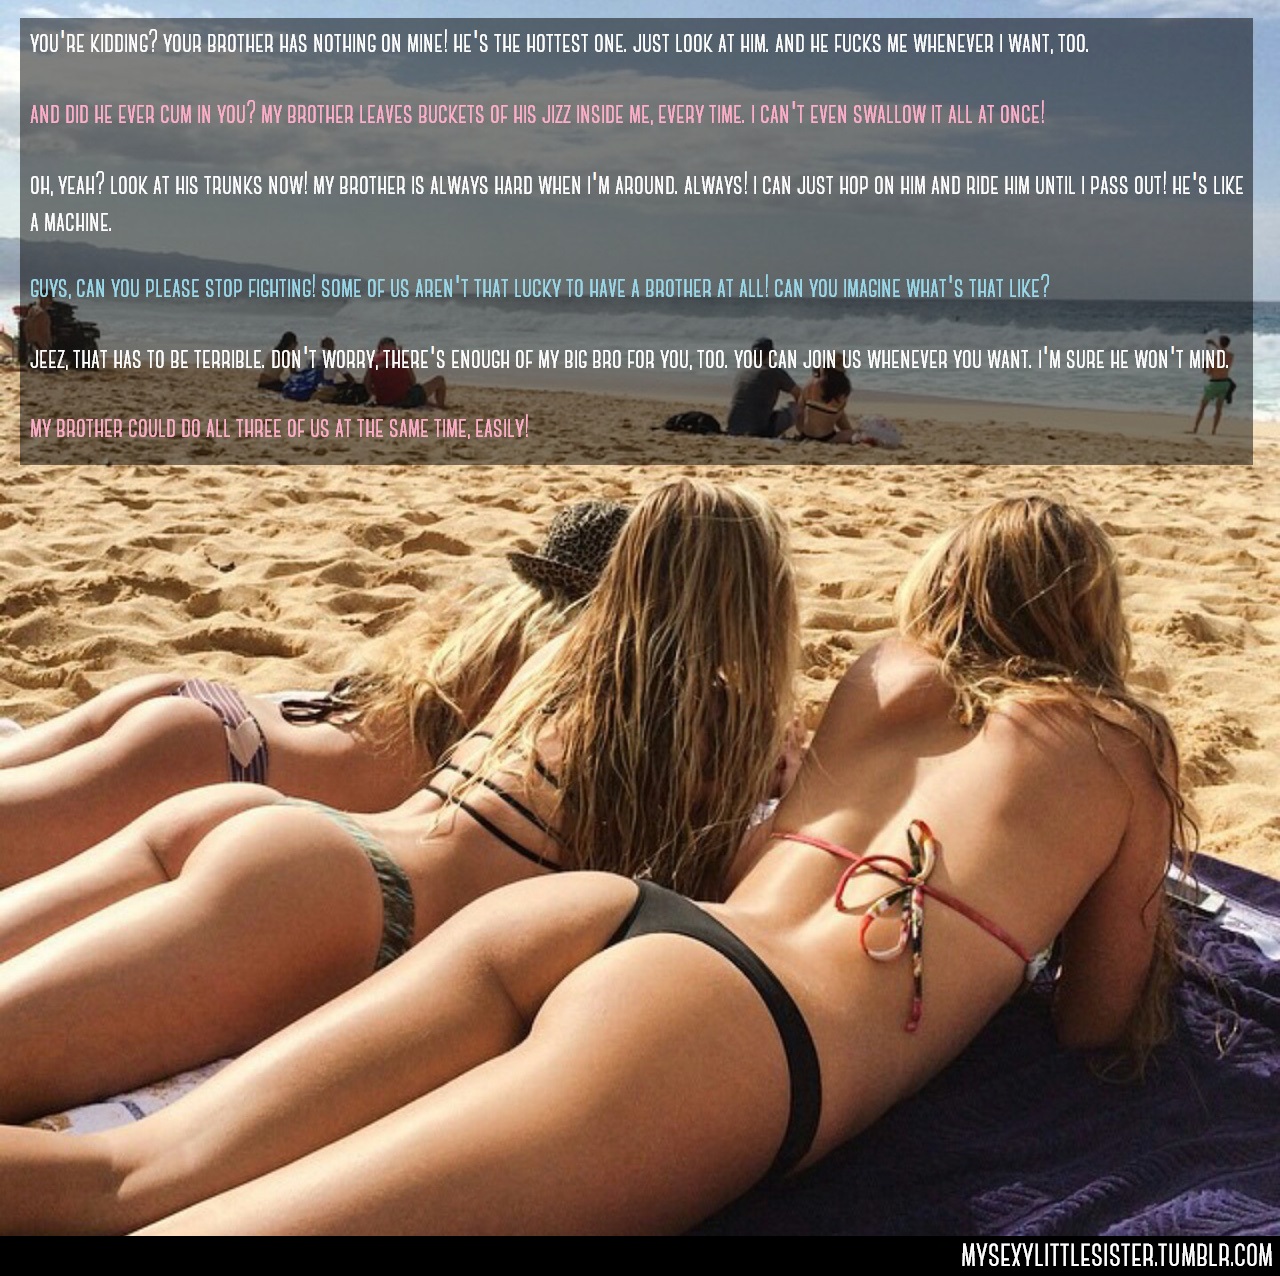 how can u suck your own dick #Mysexylittlesister #sister #brother #incest #siblings #BrotherSister #butt #beach #bikini